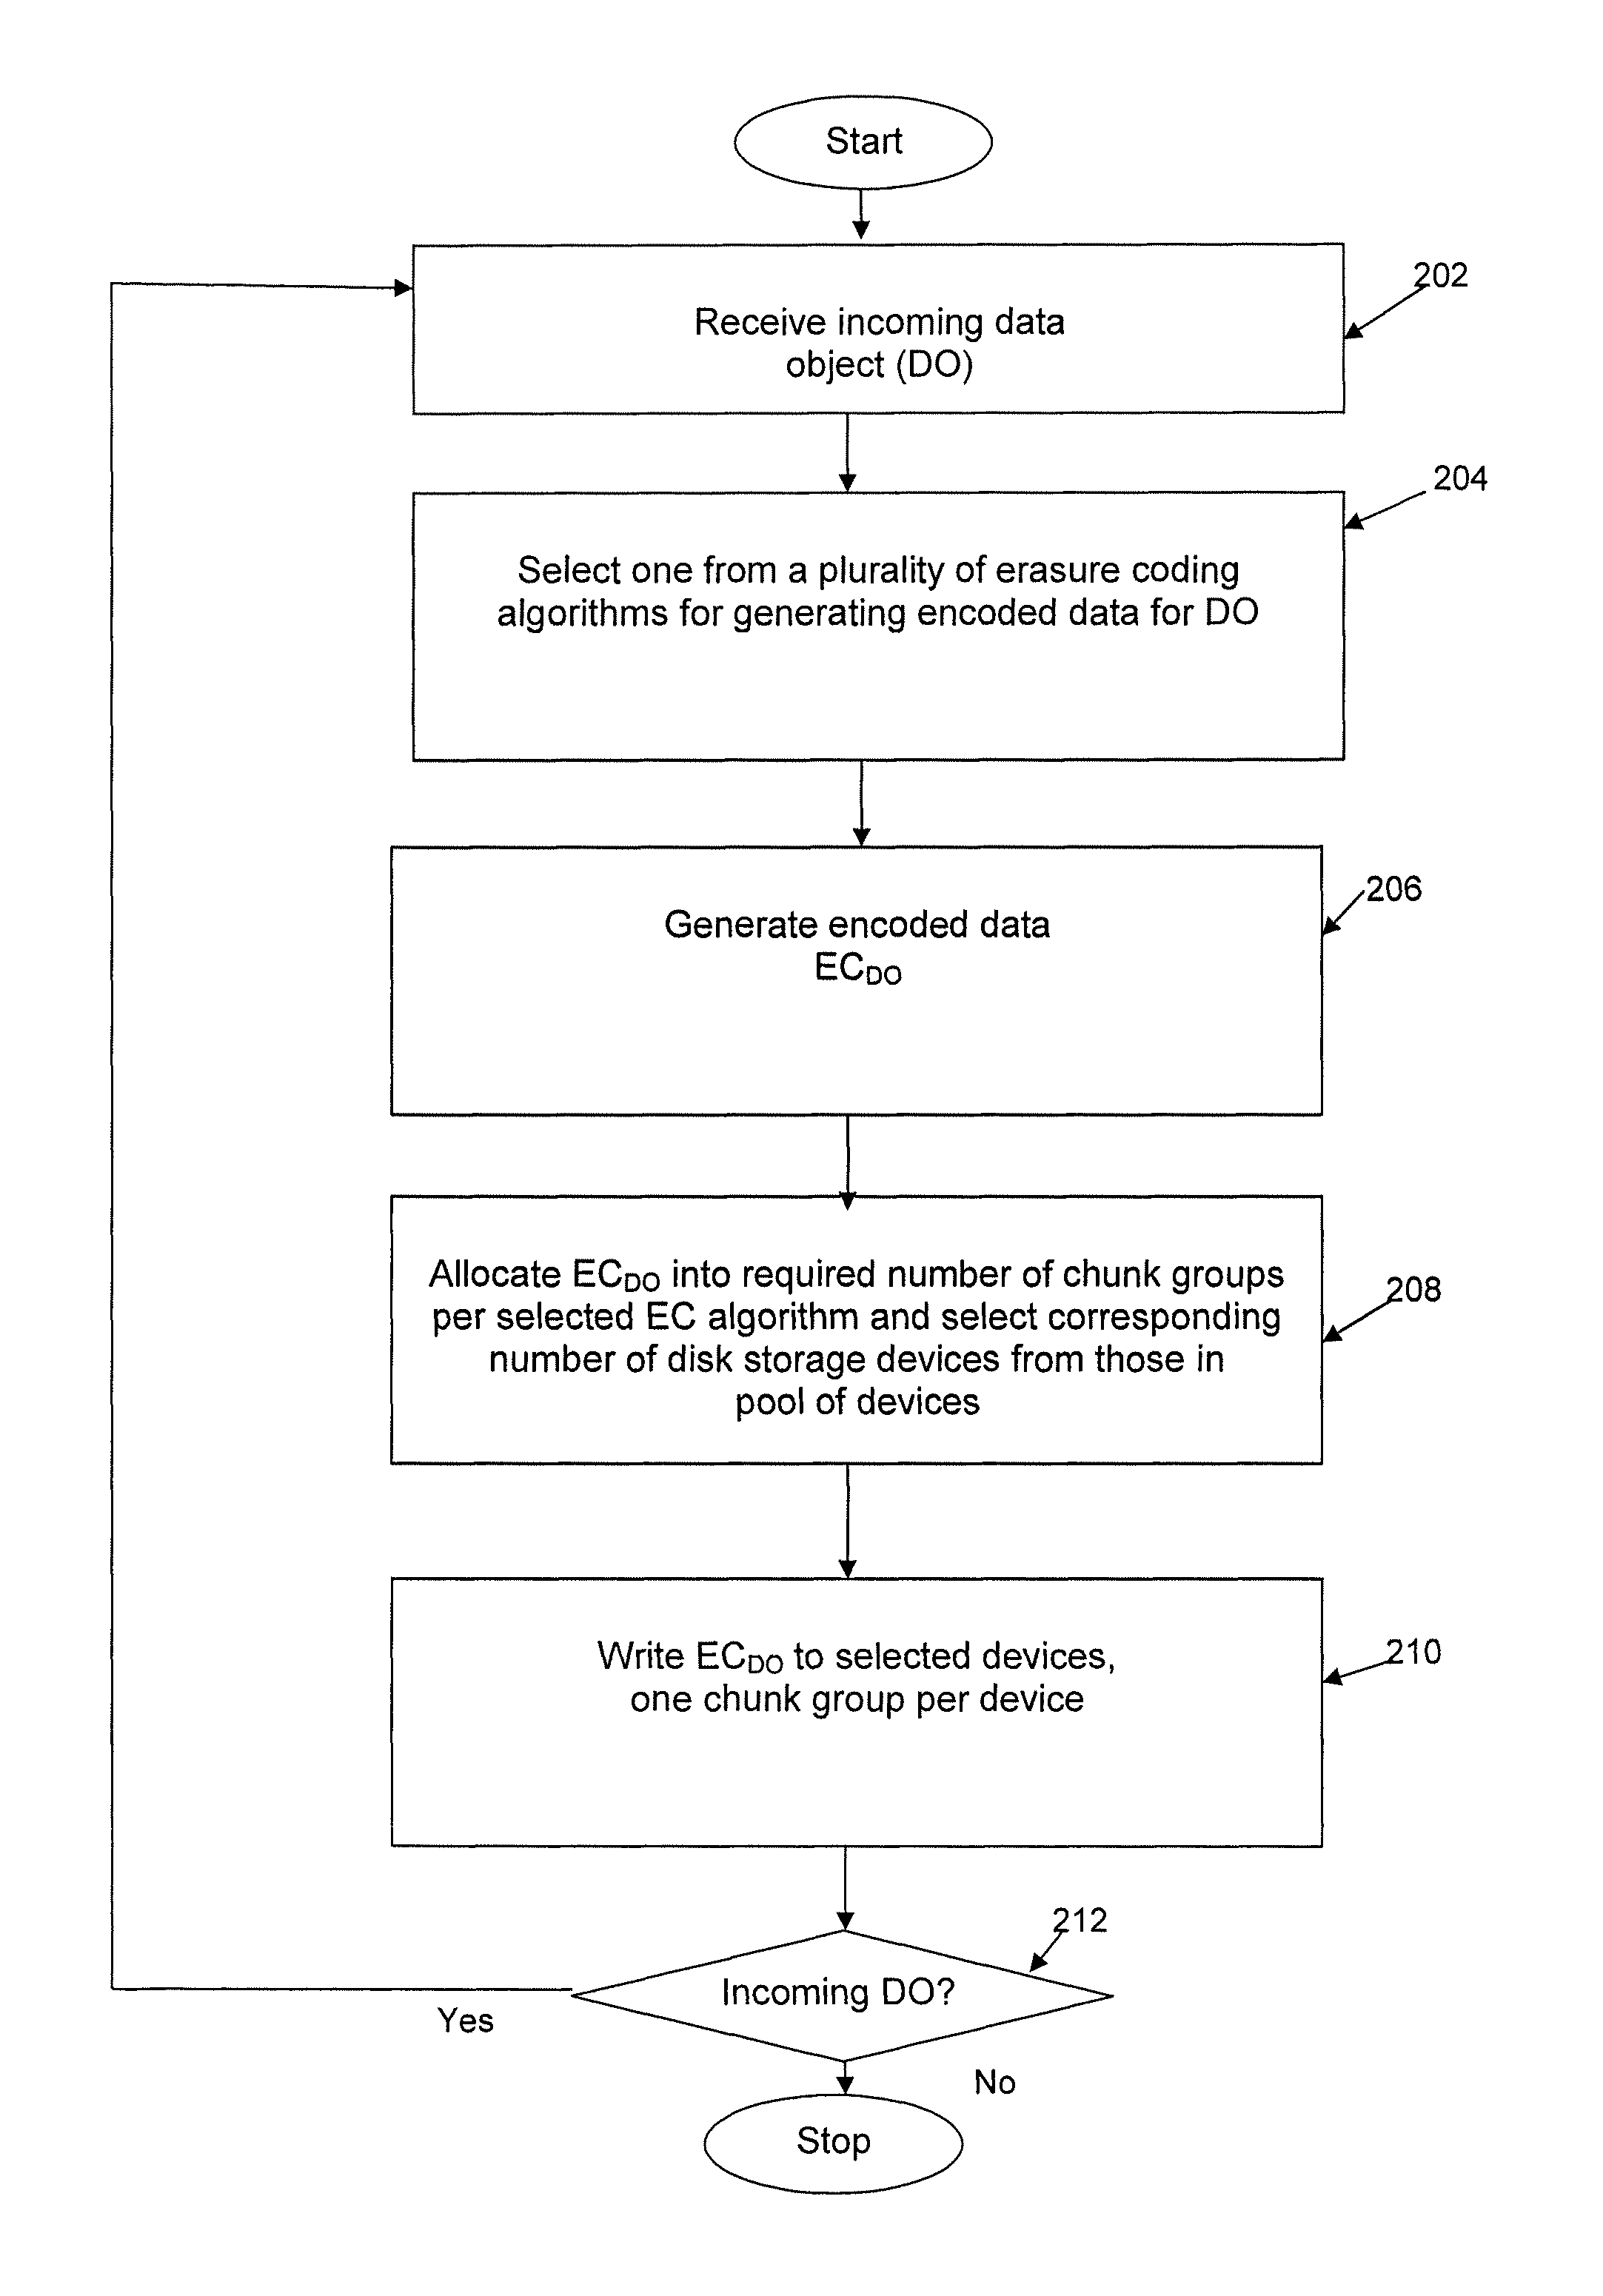 Method and apparatus for allocating erasure coded data to disk storage